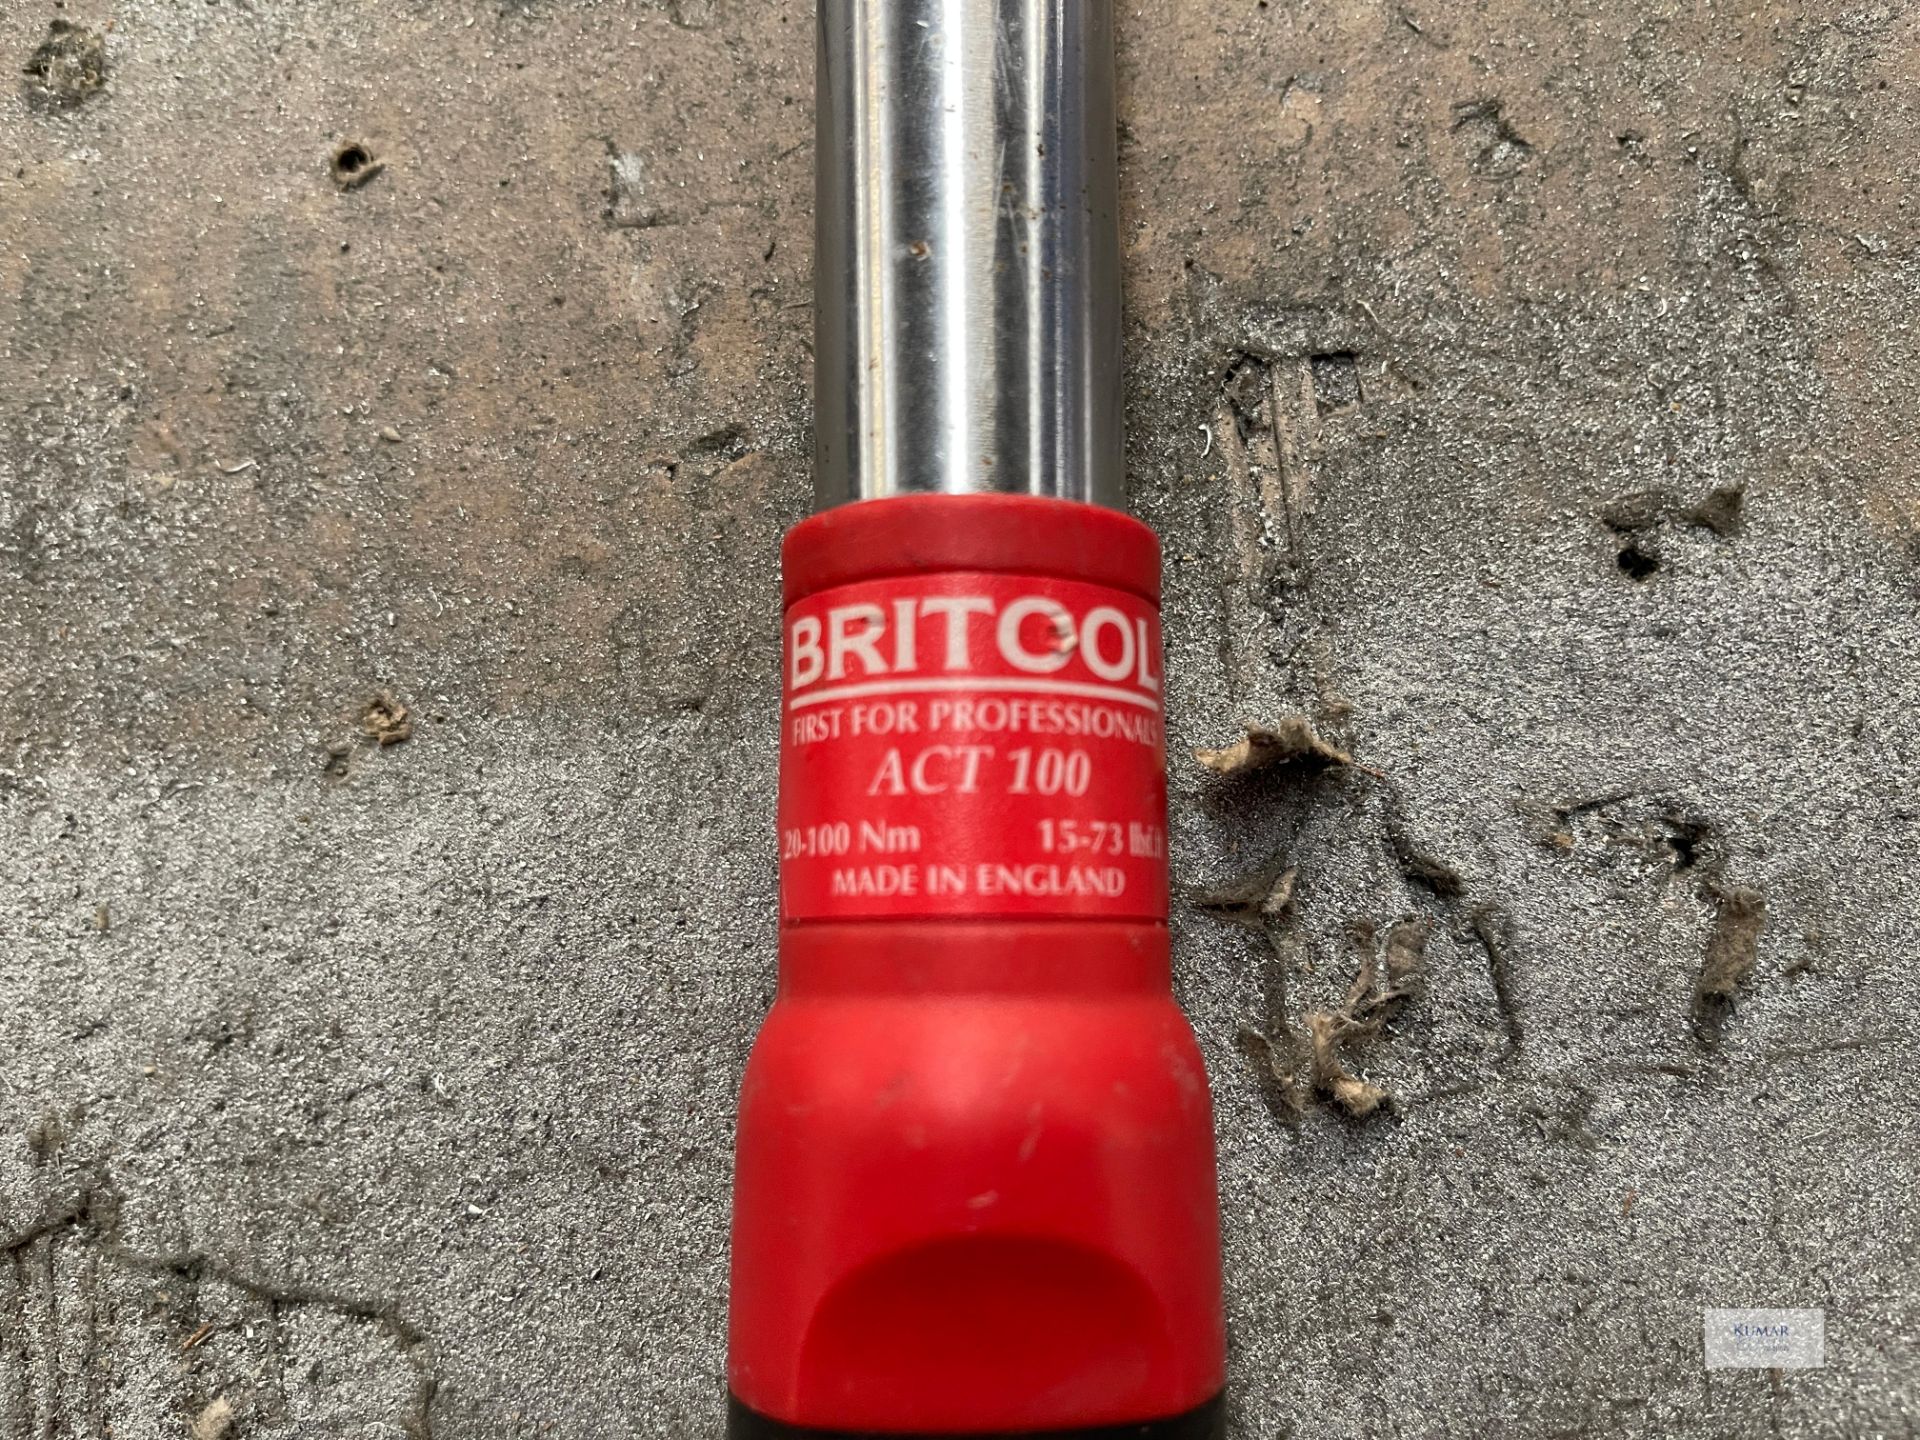 Britool ACT 100 Torque Wrench